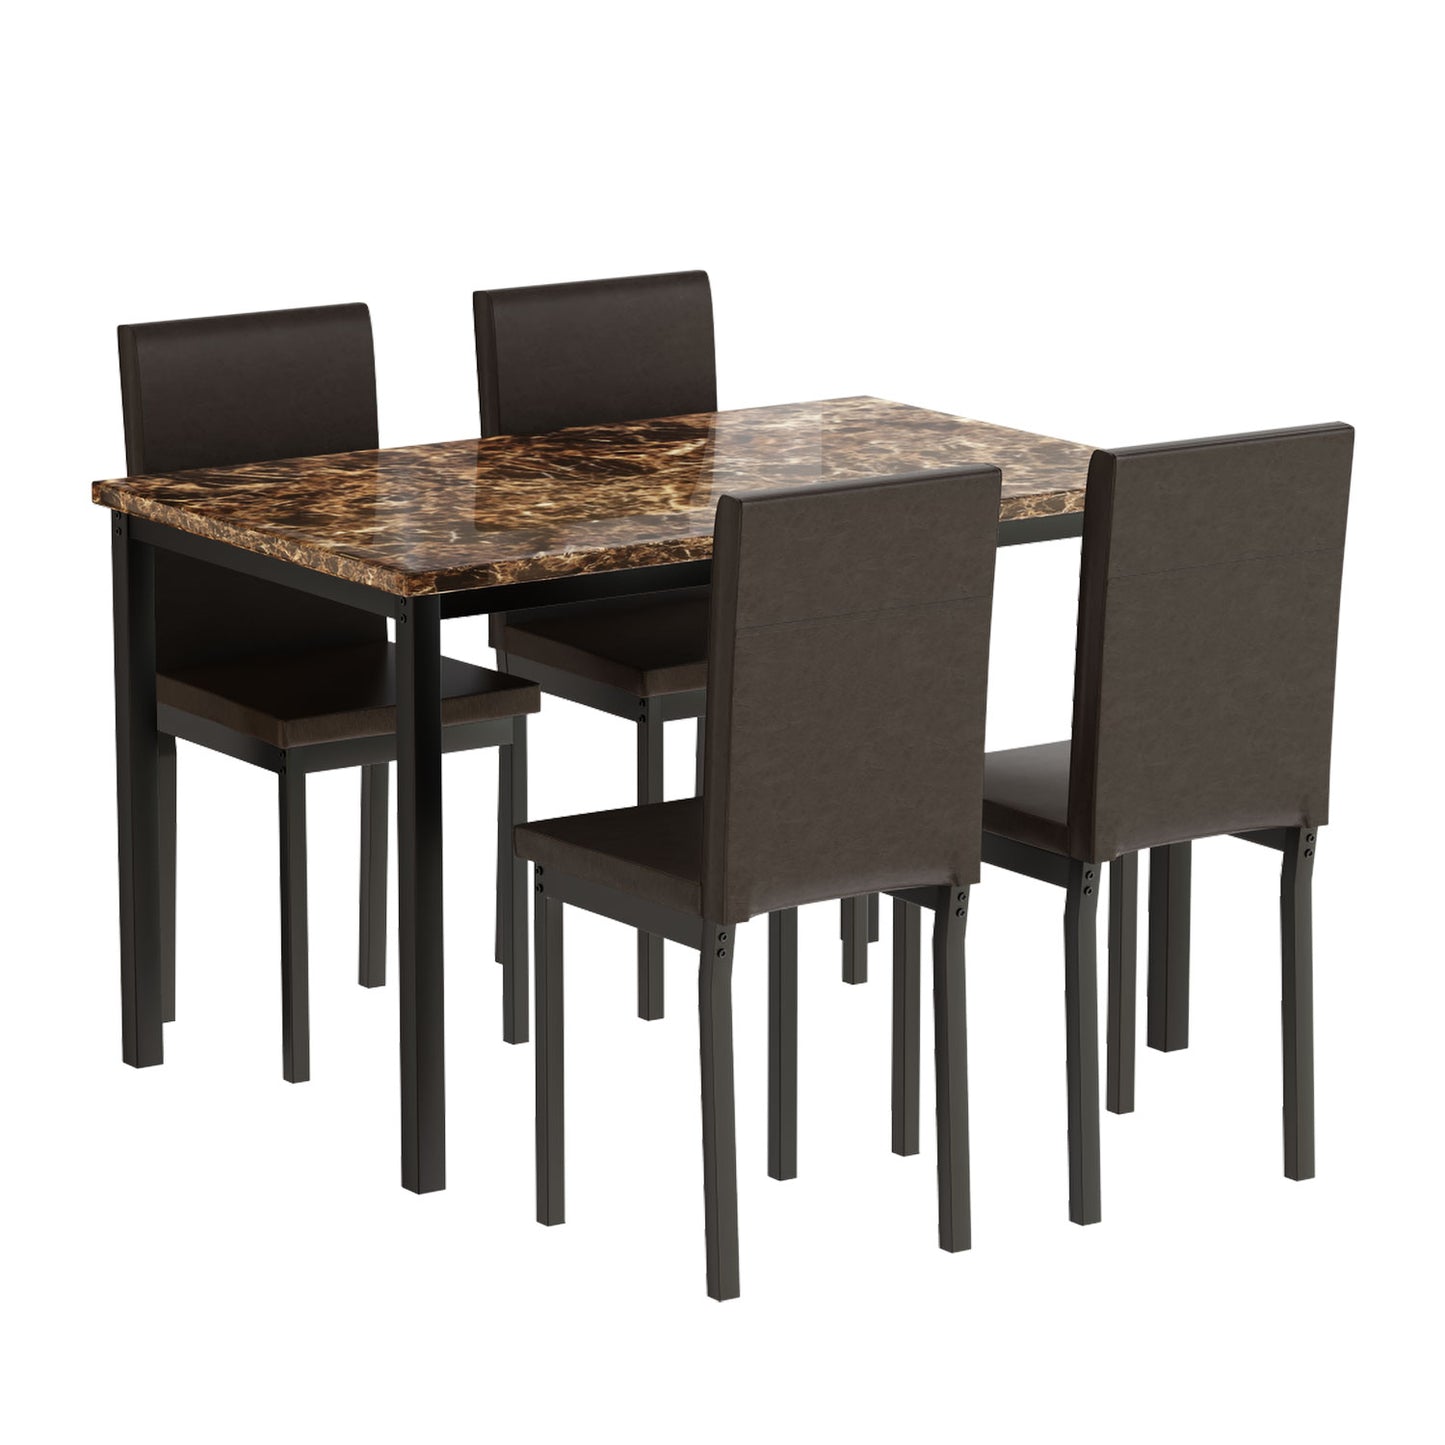 Modern Dining Table Set for 4, Faux Marble Table and PU Leather Upholstered Chairs Set, 5 Piece Kitchen Dining Set, Dining Table and Chairs Set for Small Space, Breakfast Nook, Brown, D7153